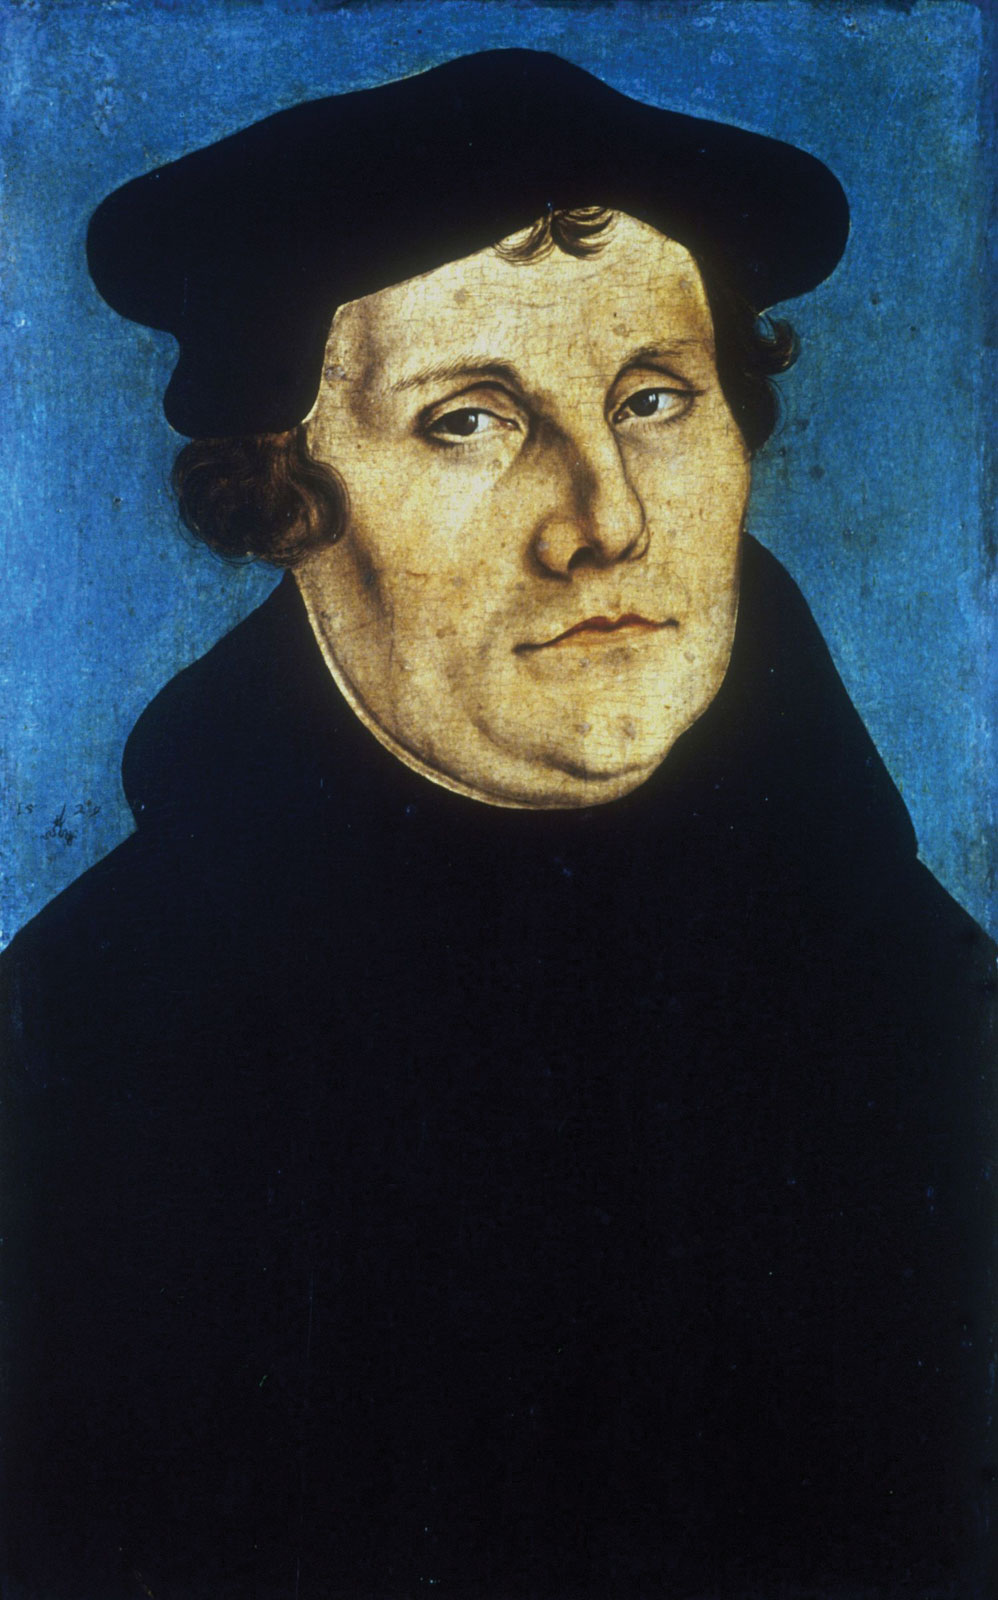 National hero of Germany - Martin Luther